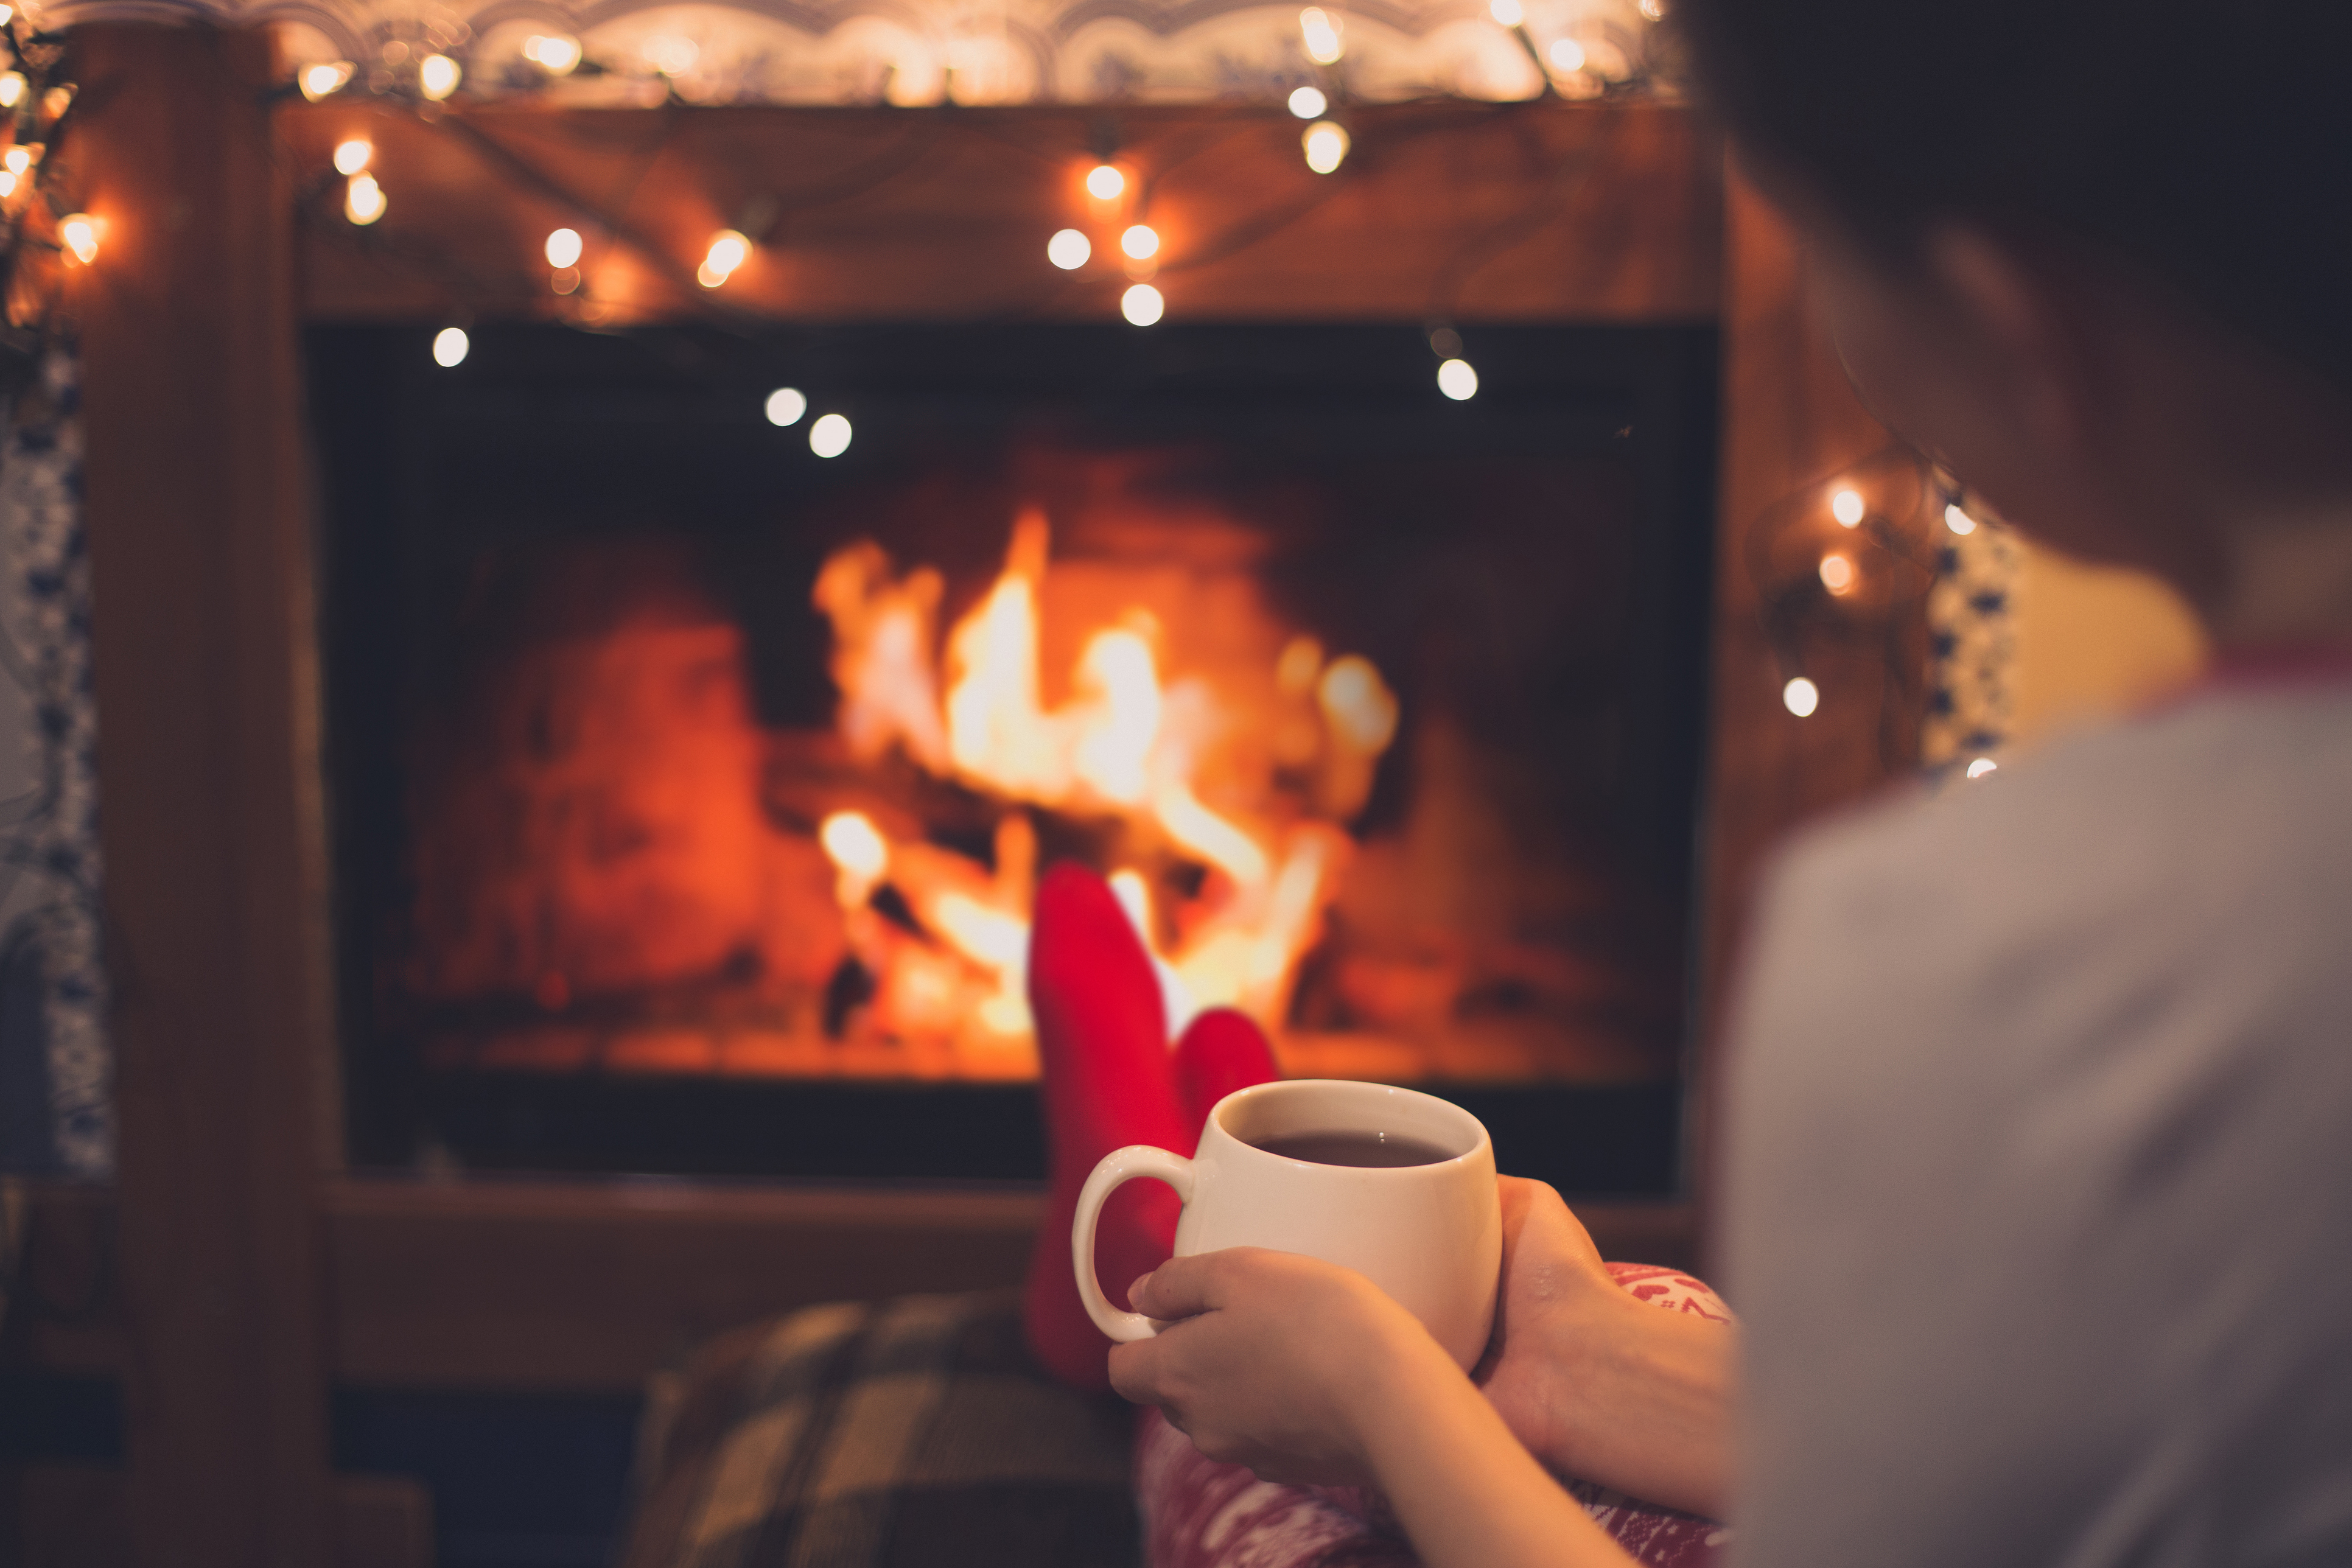 A woman sits by a fireplace with twinkle lights and drinks tea